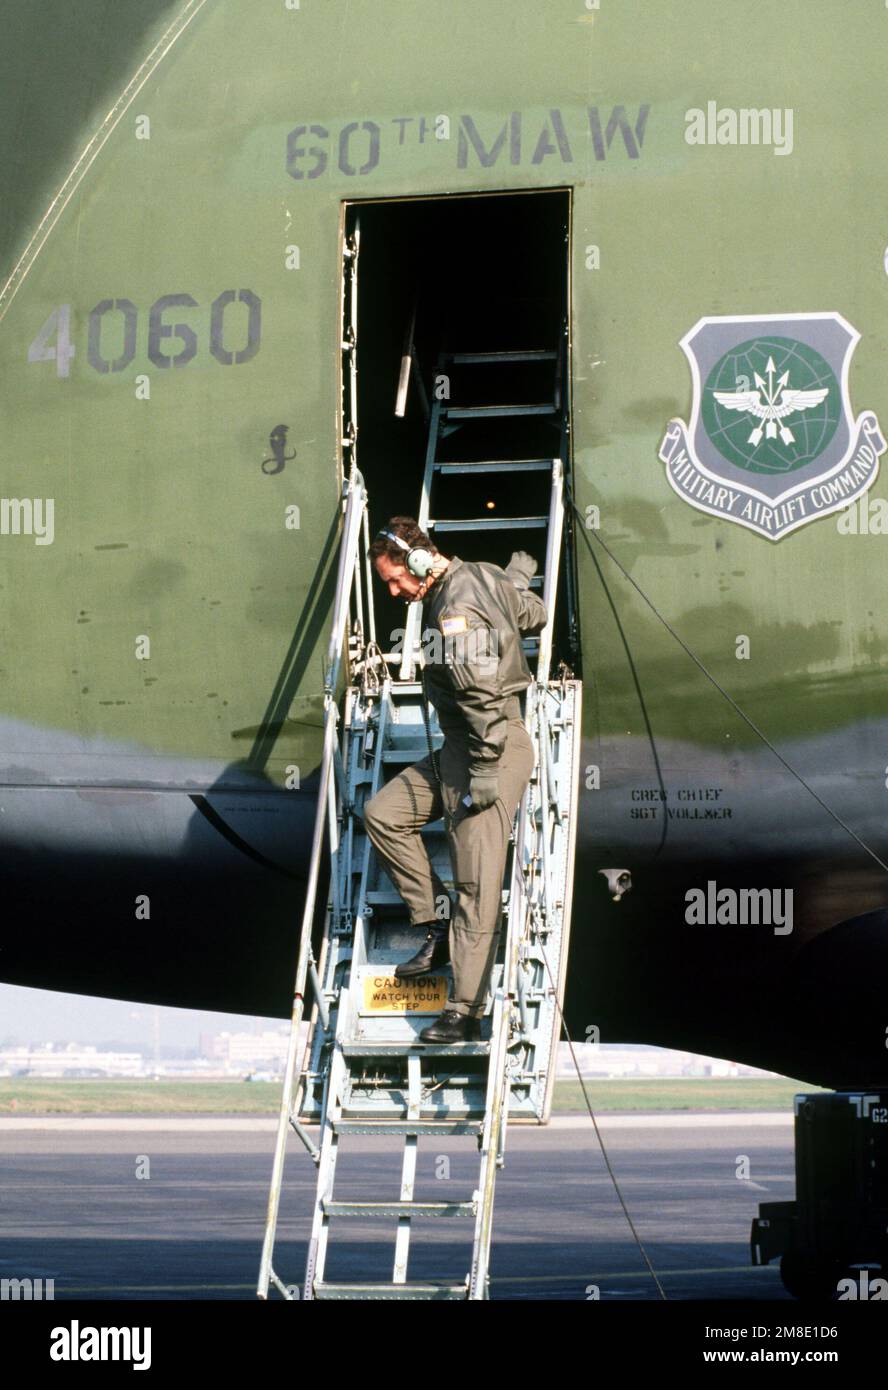 An airman stands on the steps of a 60th Military Airlift Wing C-5B Galaxy aircraft as it is prepared for departure. The aircraft will be flying to Prague, Czechoslovakia, where it will deliver 130,000 pounds of donated medical supplies to the Czech government for distribution. Base: Rhein-Main Air Base Country: Deutschland / Germany(DEU) Stock Photo